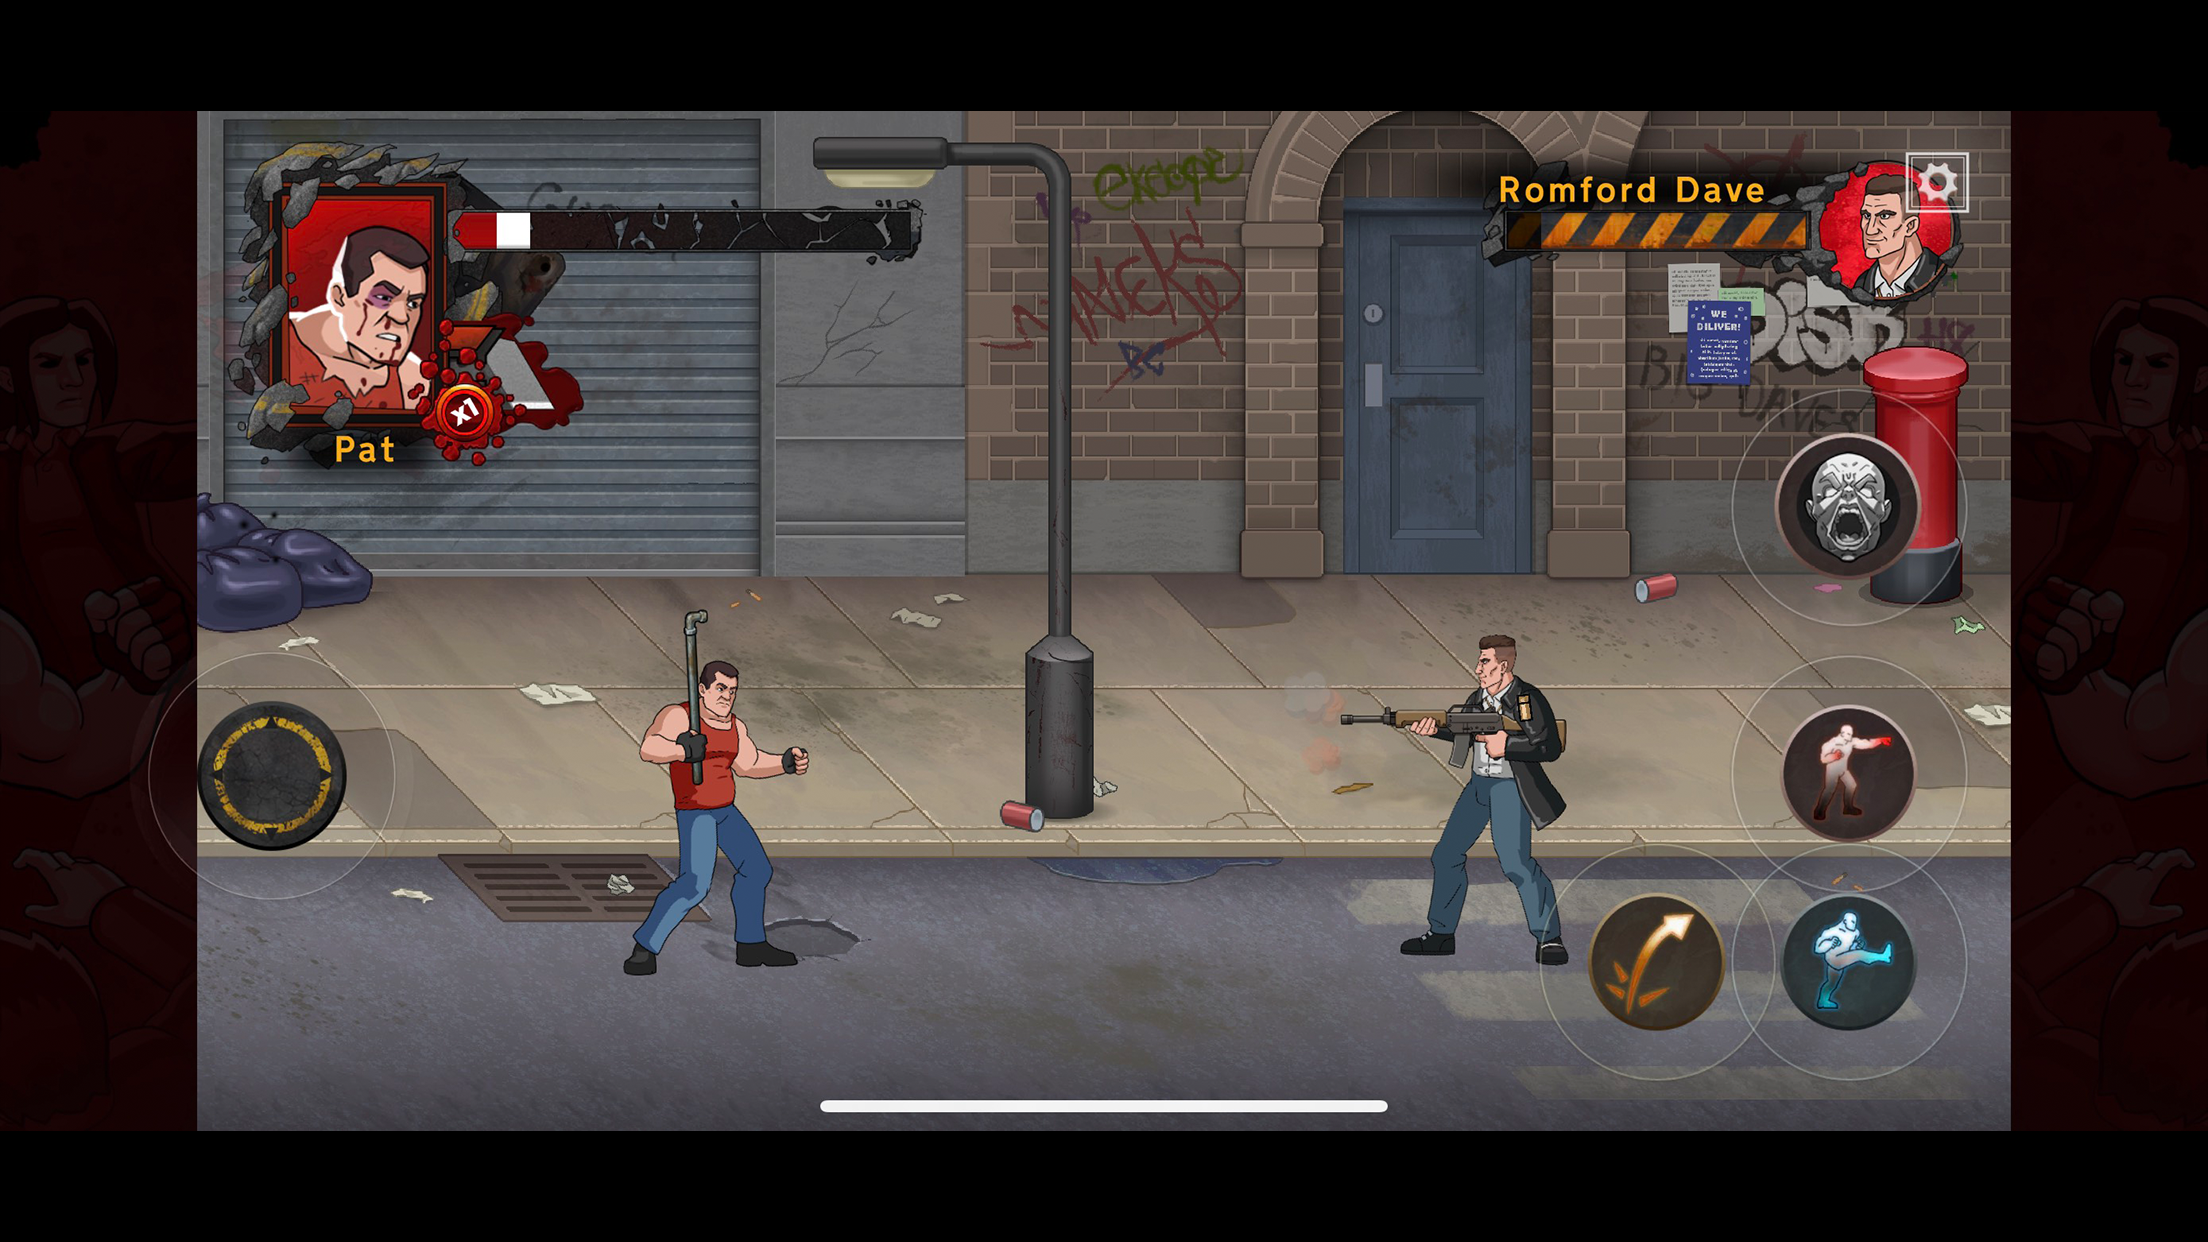 Rise of the Footsoldier Game ภาพหน้าจอเกม